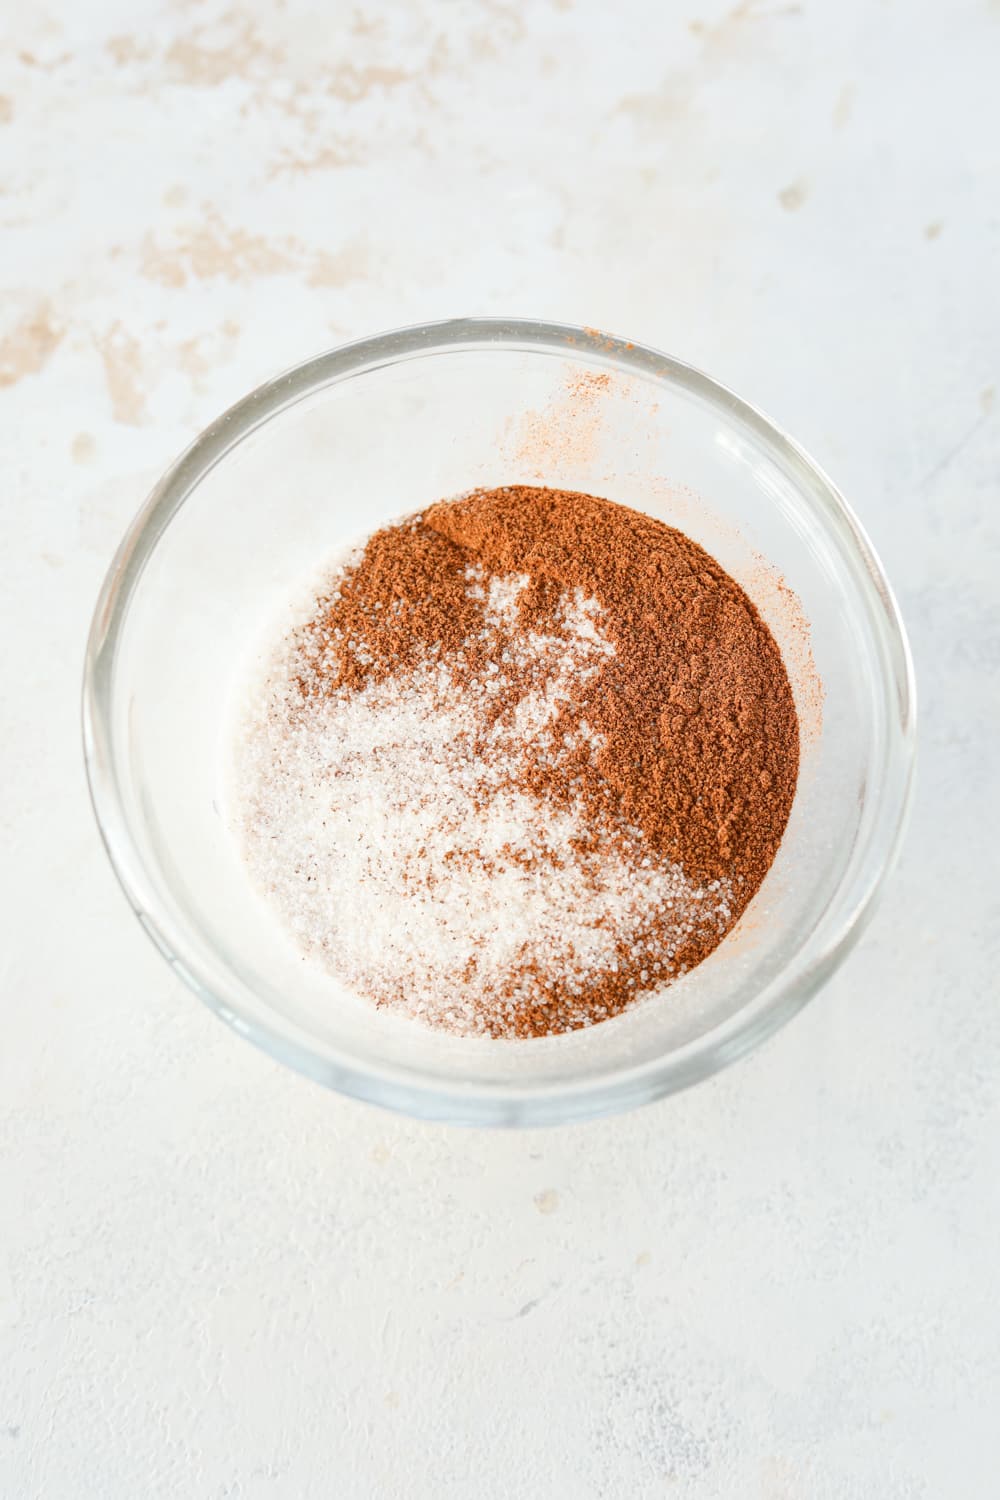 Cinnamon and sweetener unmixed in a glass bowl.